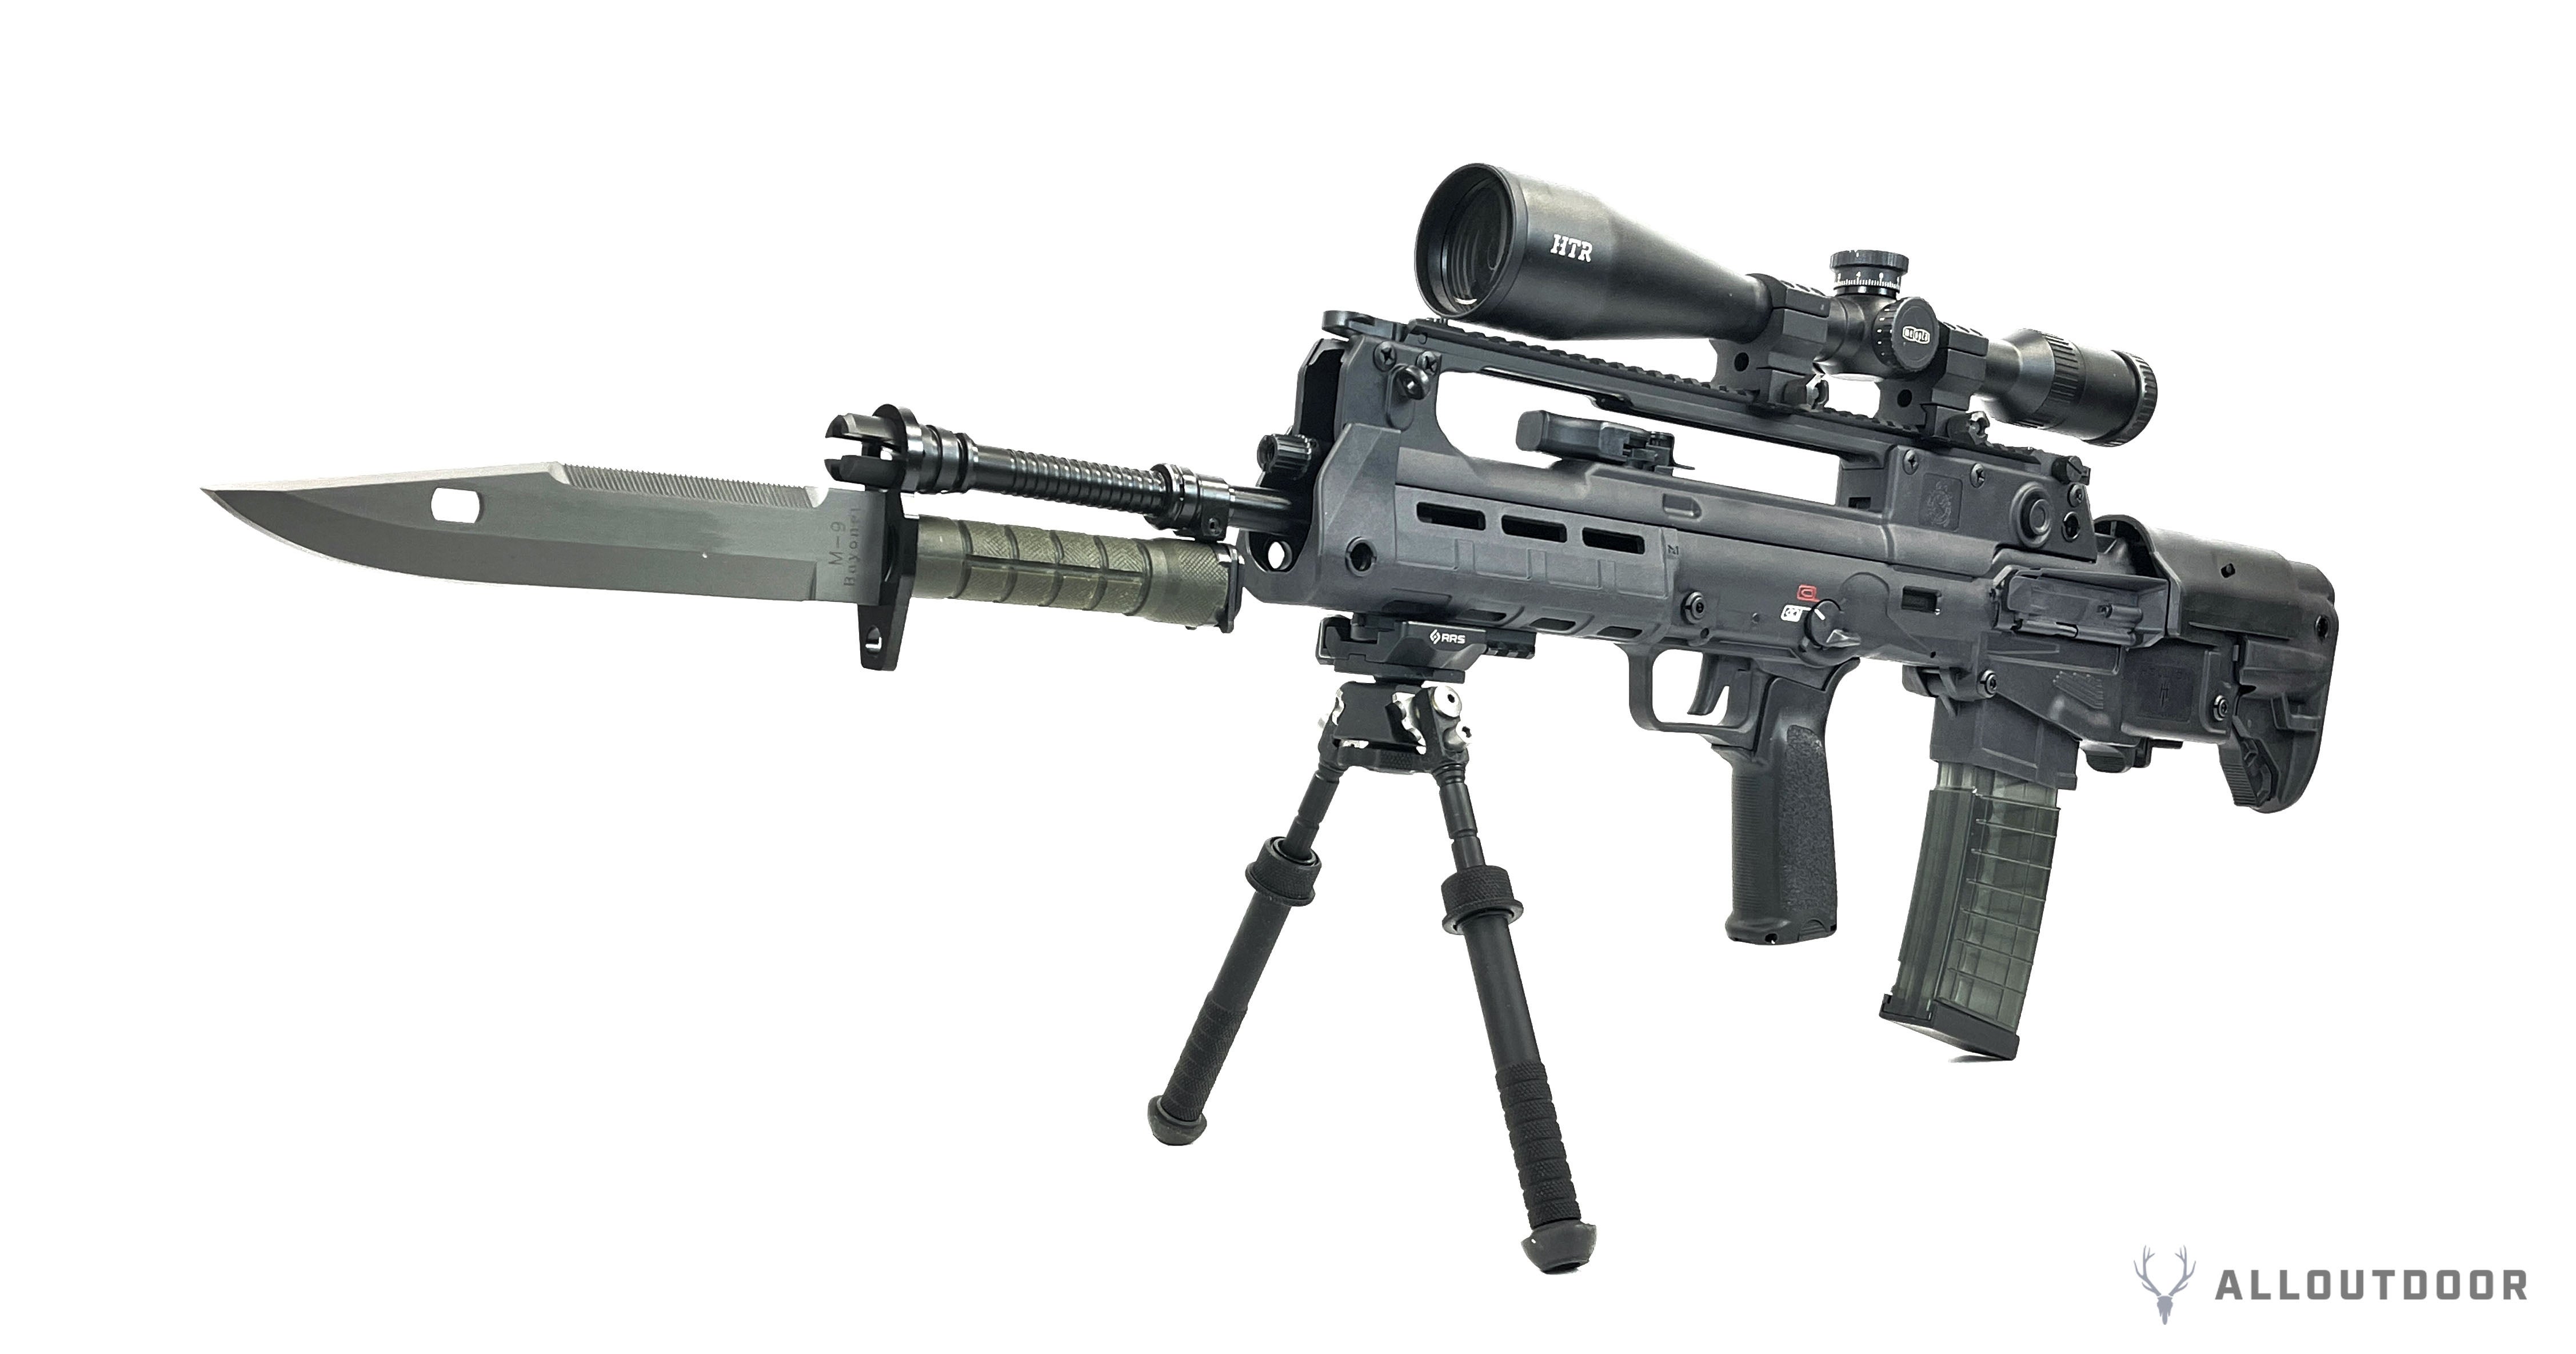 AllOutdoor Review: Springfield Armory 20" Hellion - Longer & Faster